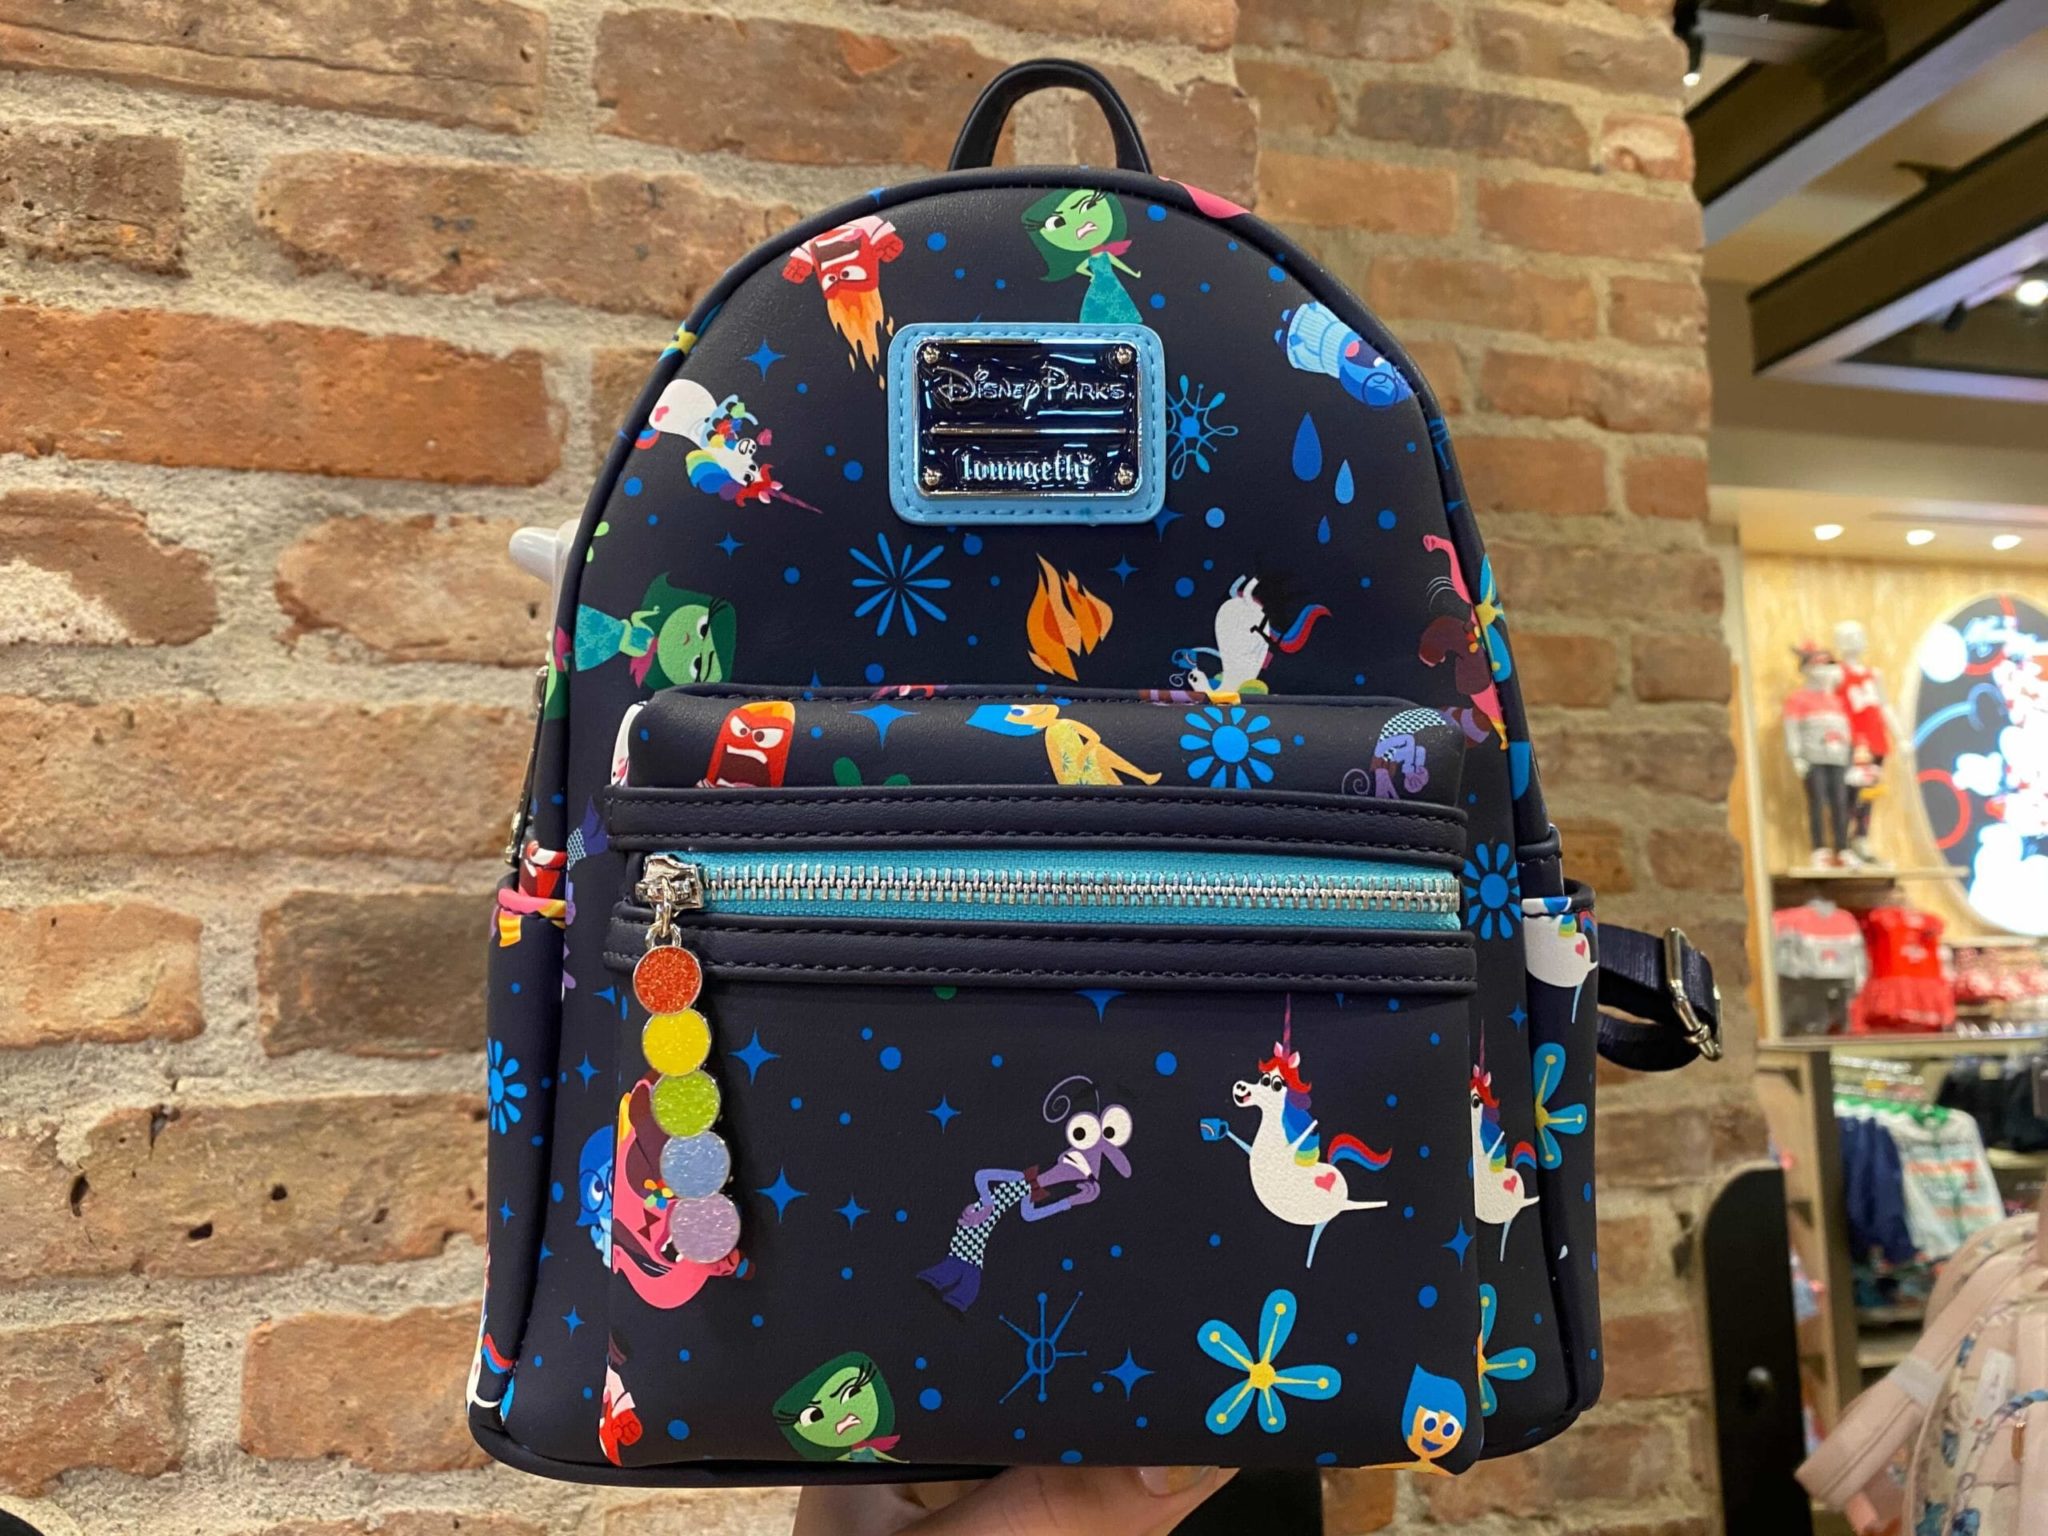 PHOTOS New Disney Parks “Inside Out” Loungefly Mini Backpack at